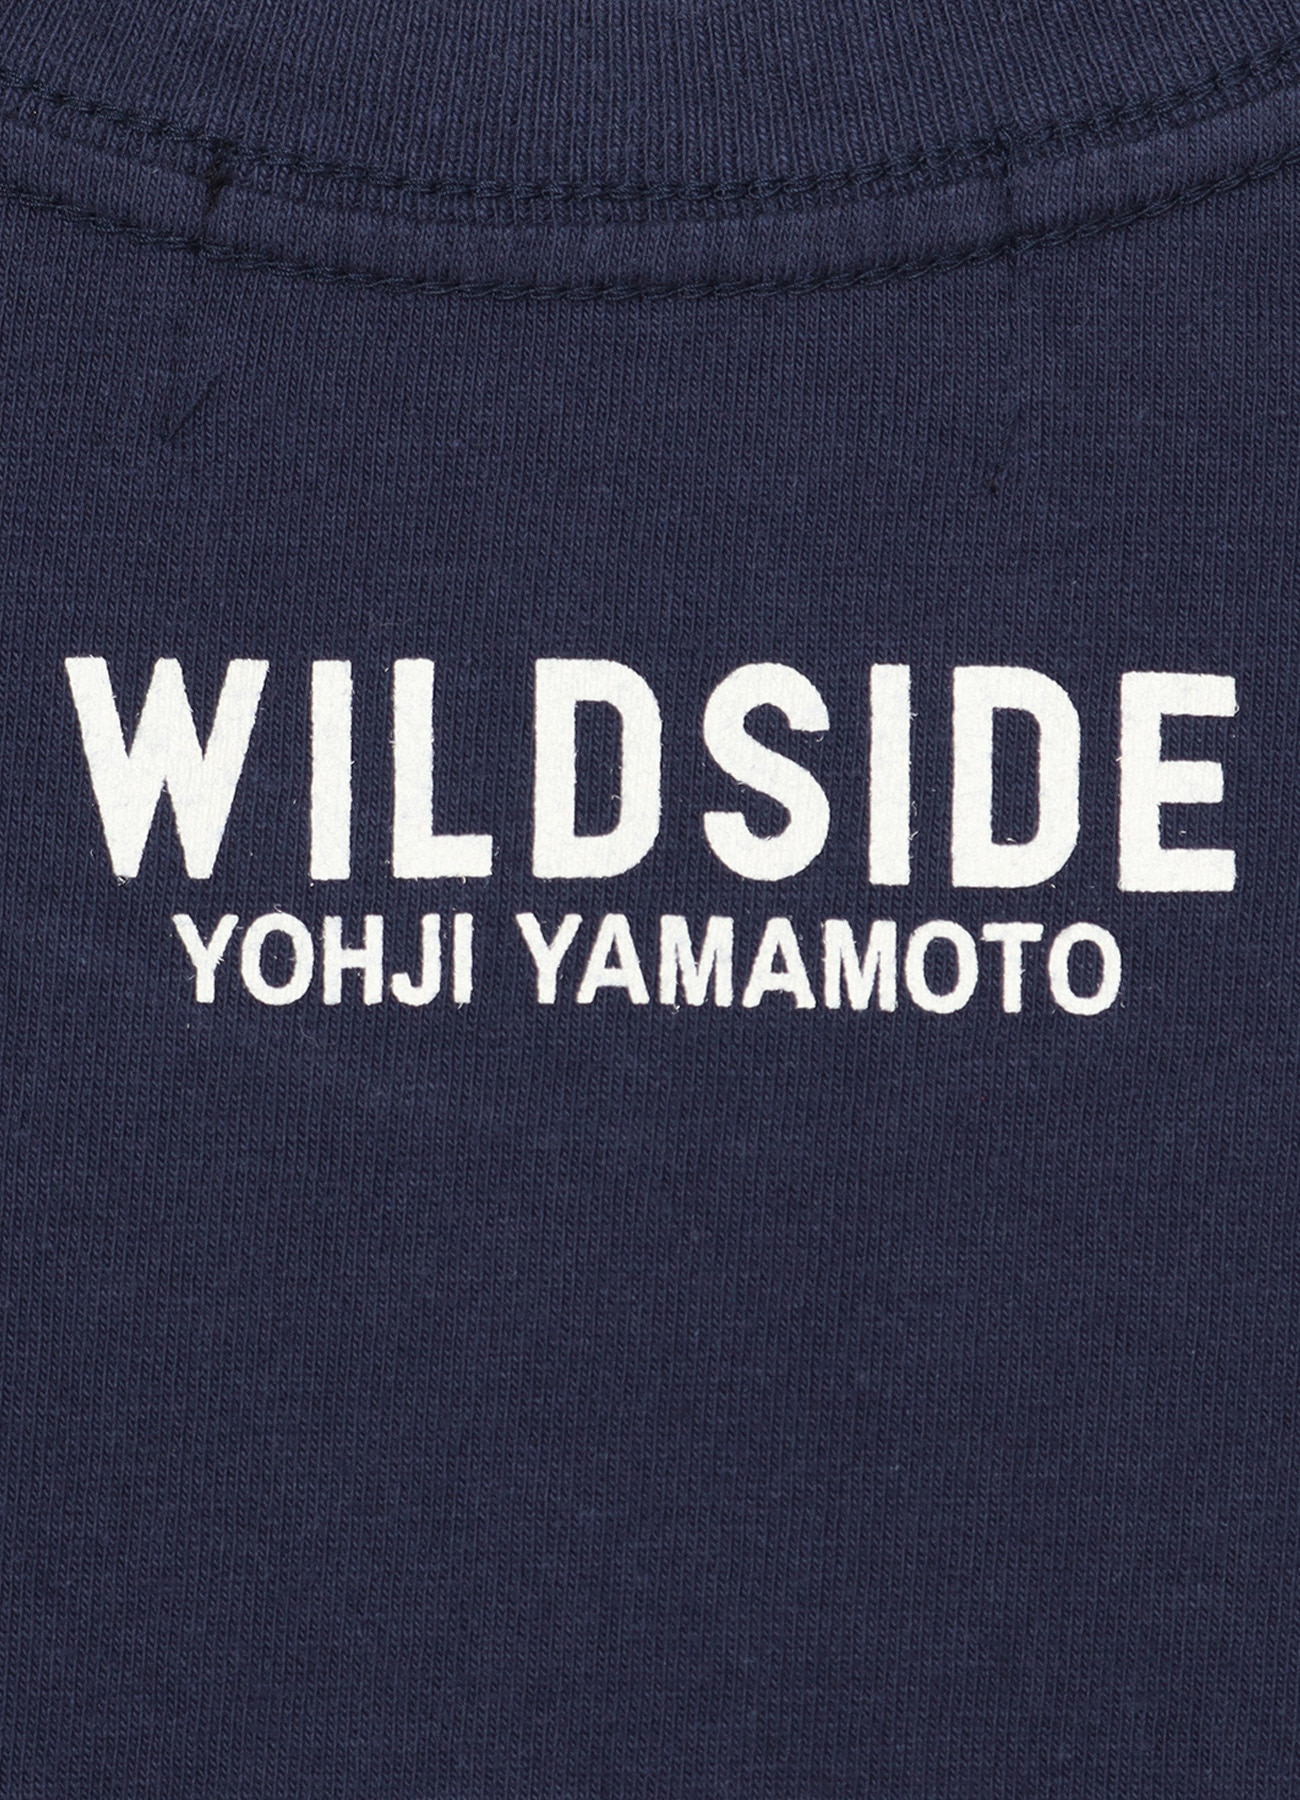 WILDSIDE × HYSTERIC GLAMOUR T-Shirt